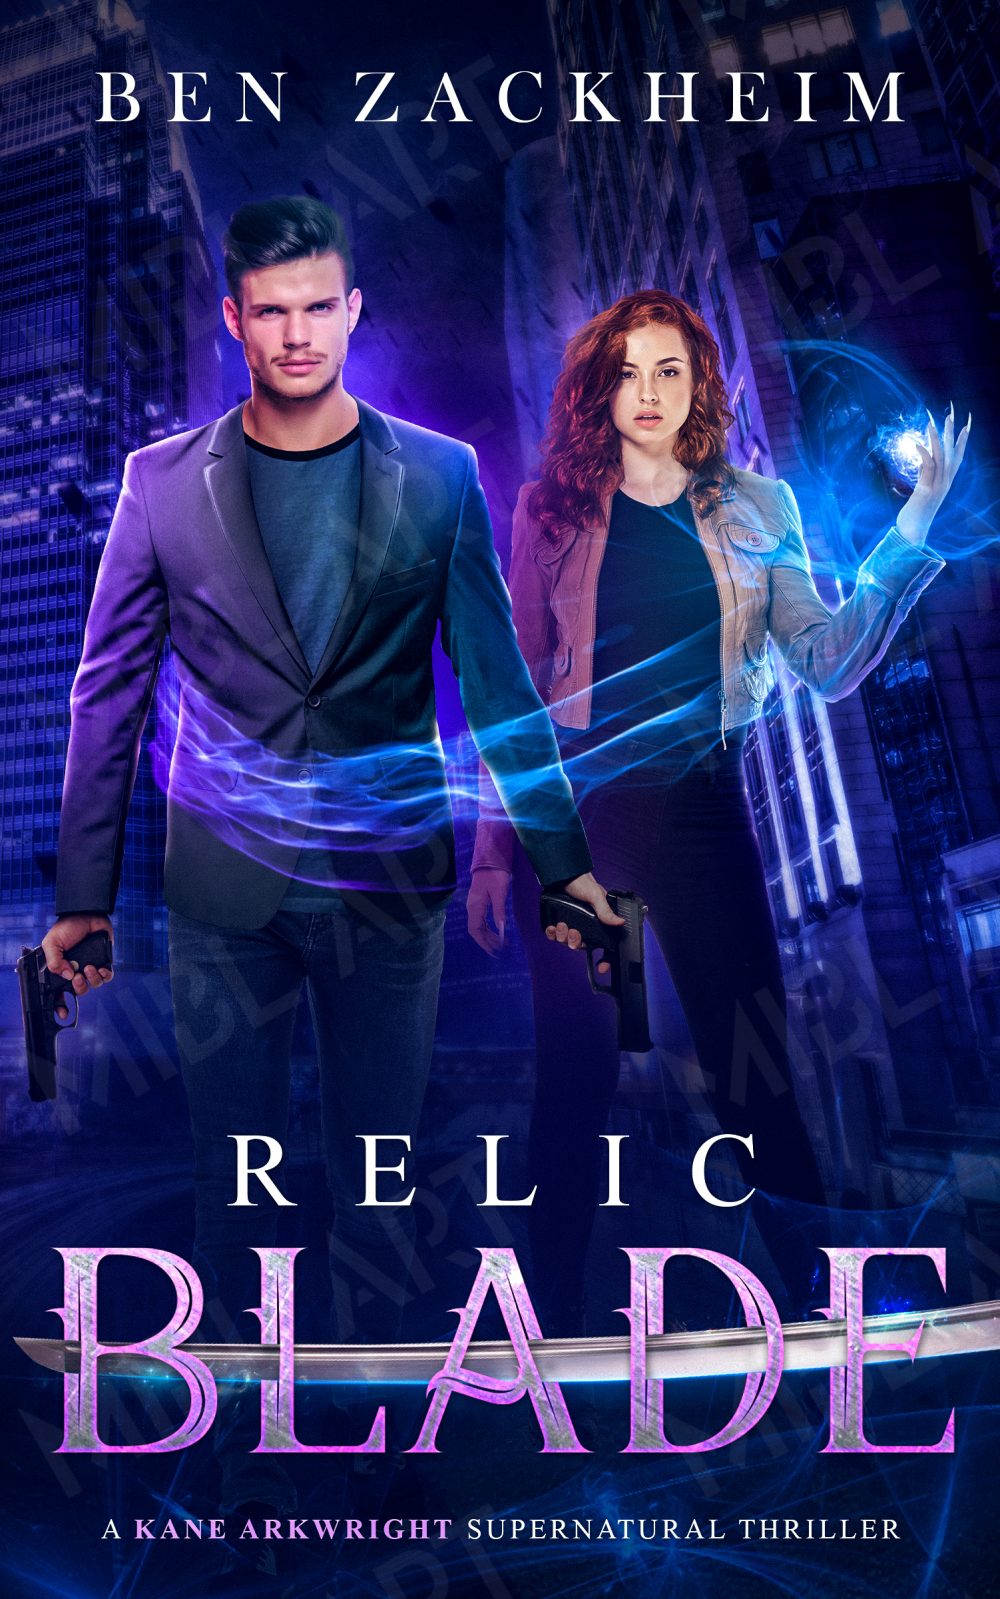 Image of cover to Relic Spear ebook in the supernatural thriller series on Amazon